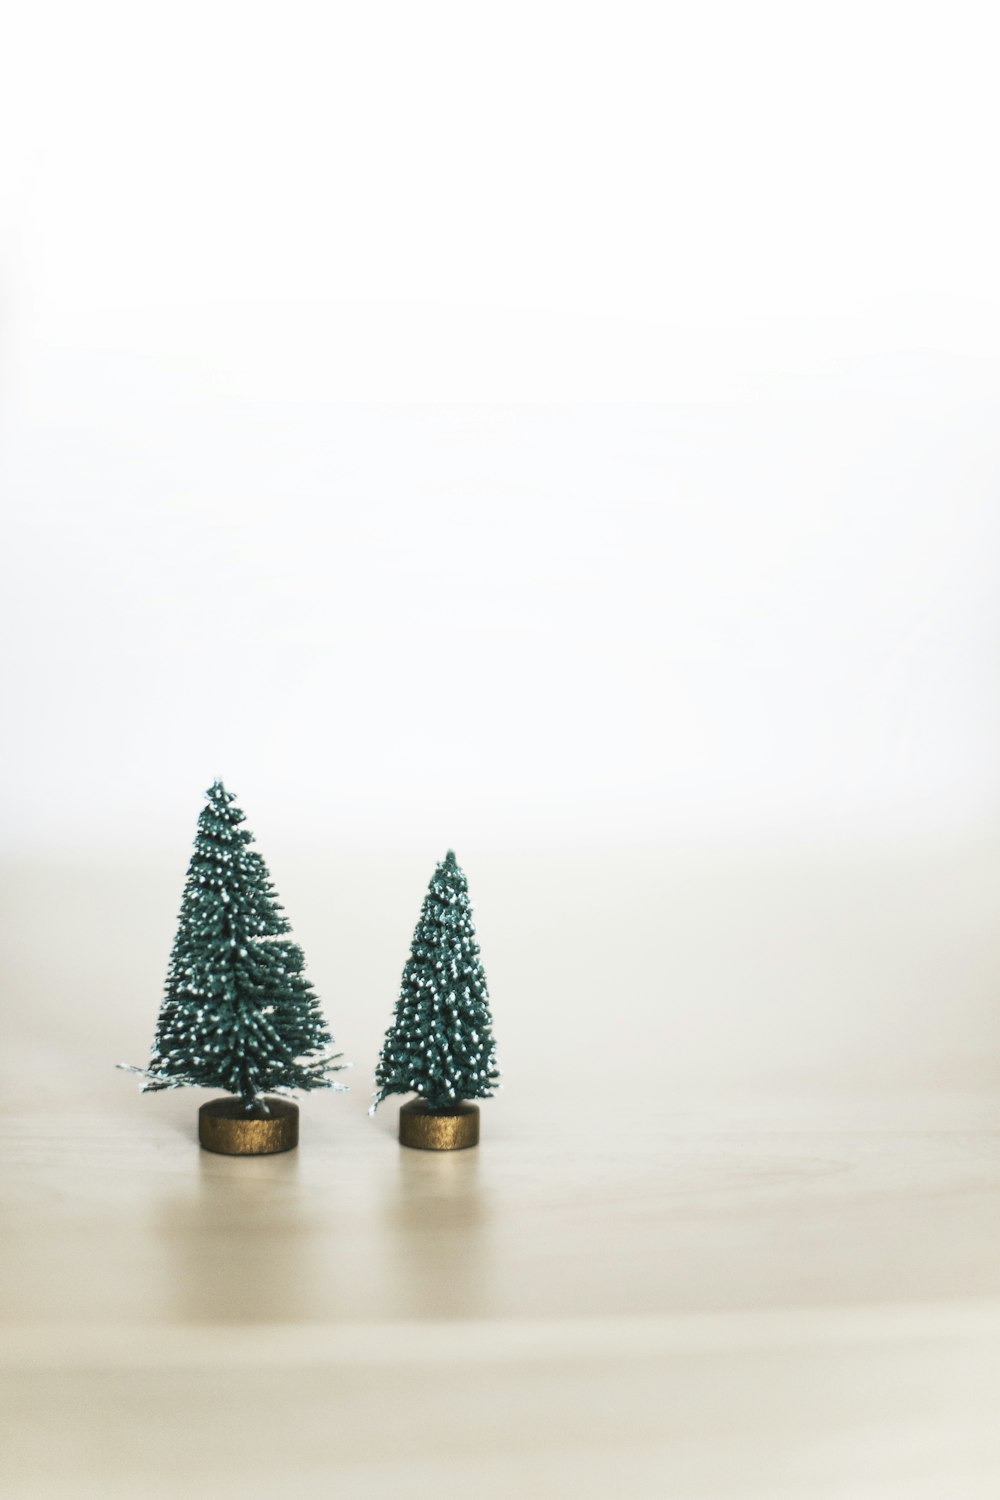 two green pine trees